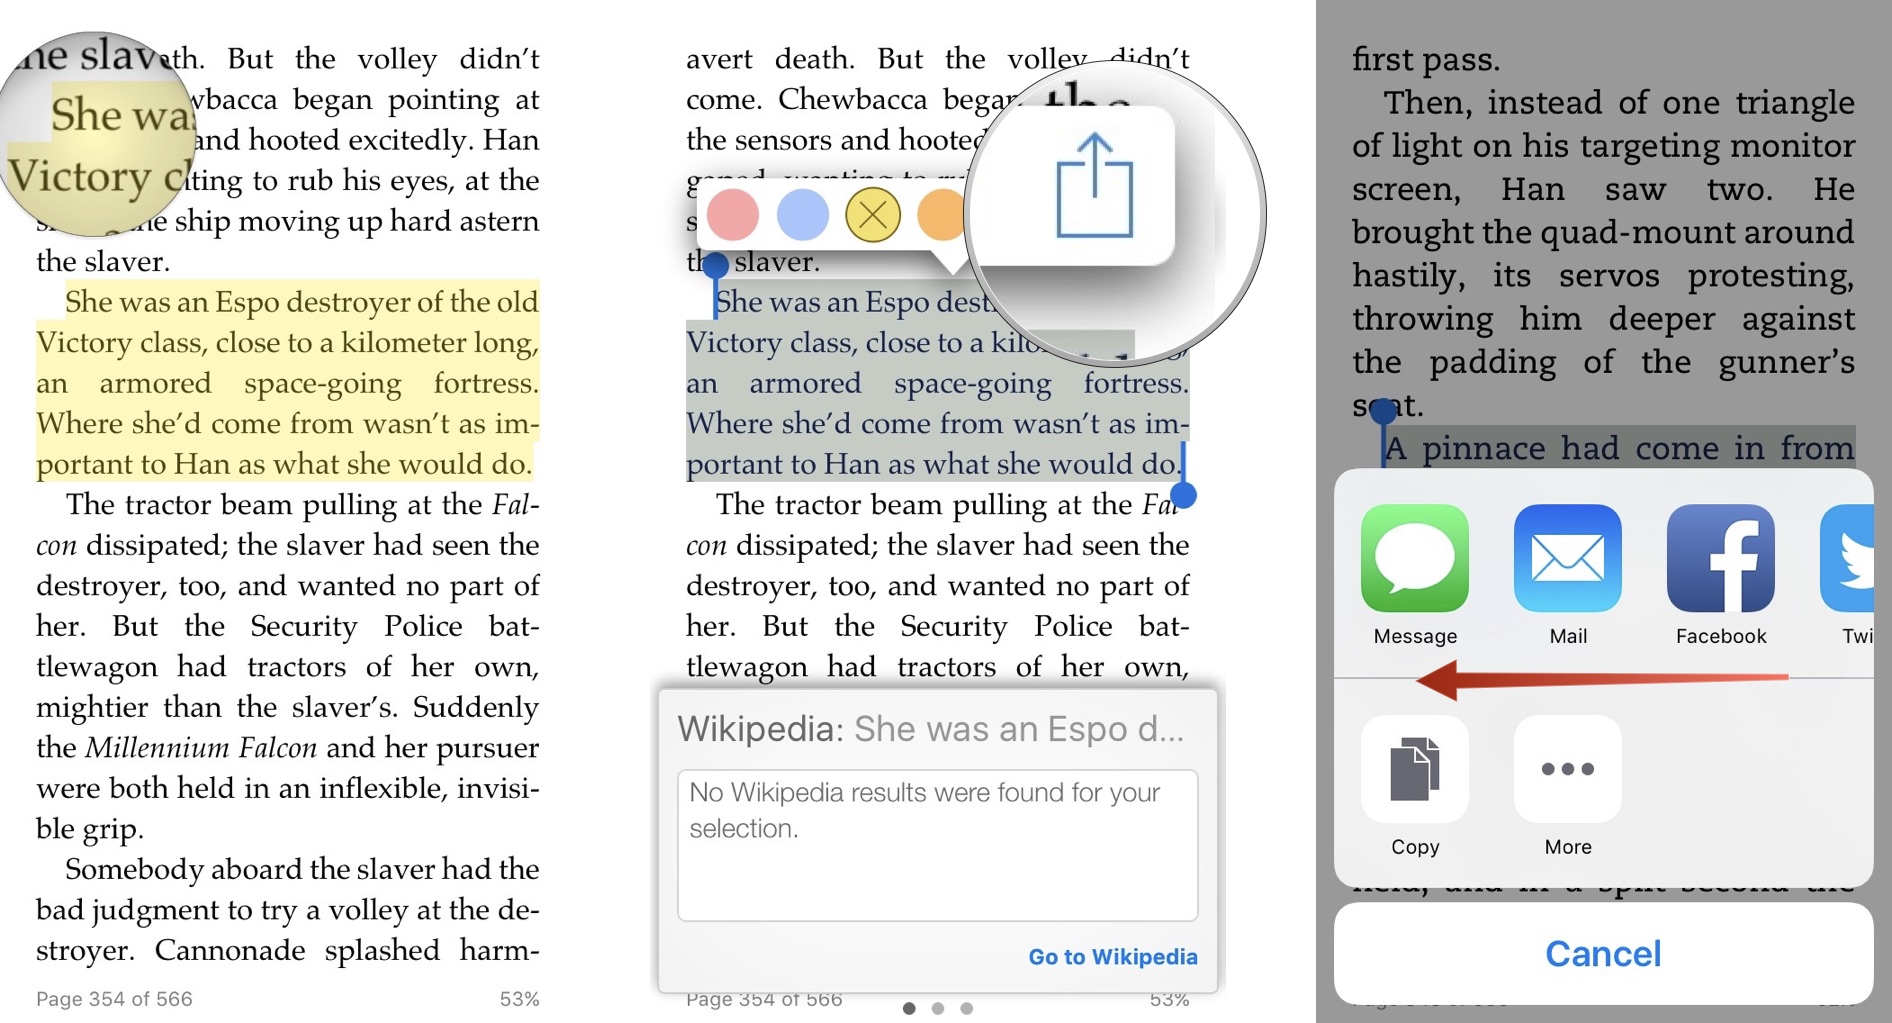 Sharing a passage of text in Kindle app